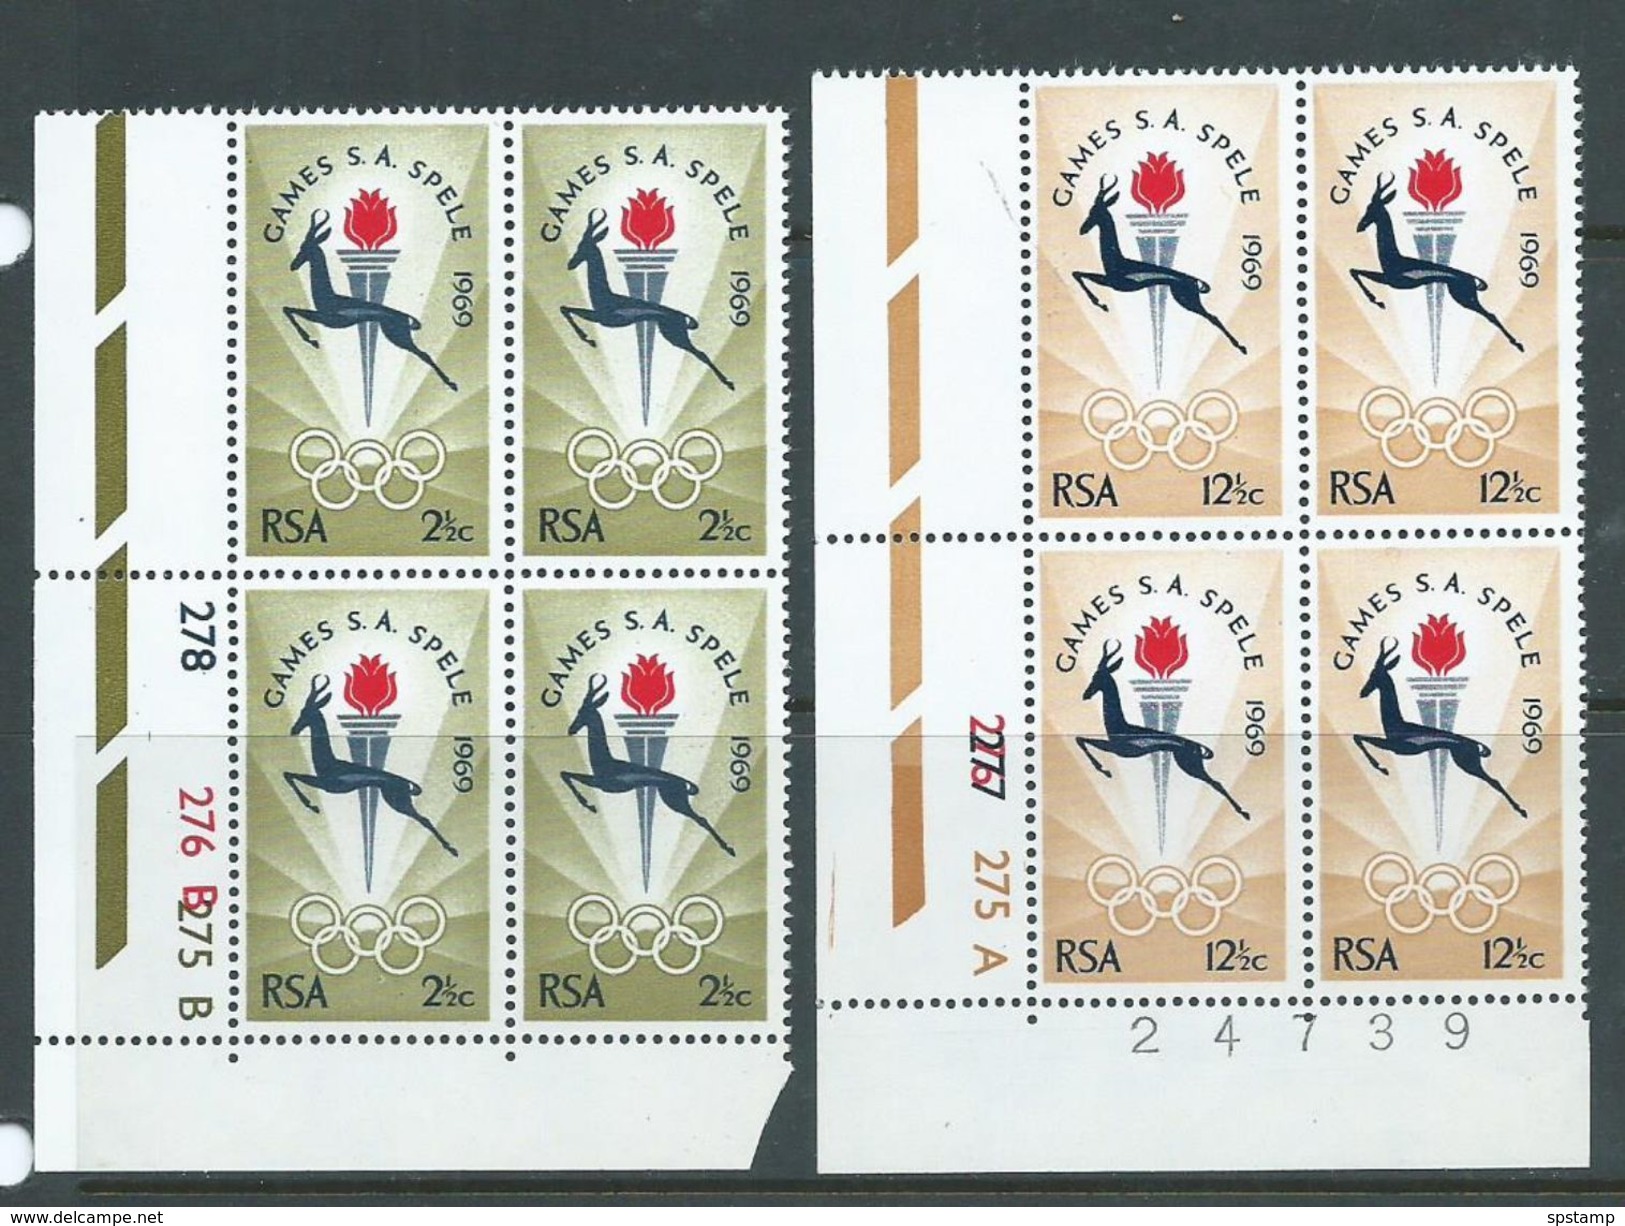 South Africa 1969 S African Games Set 2 MNH Positional Blocks Of 4 - Neufs